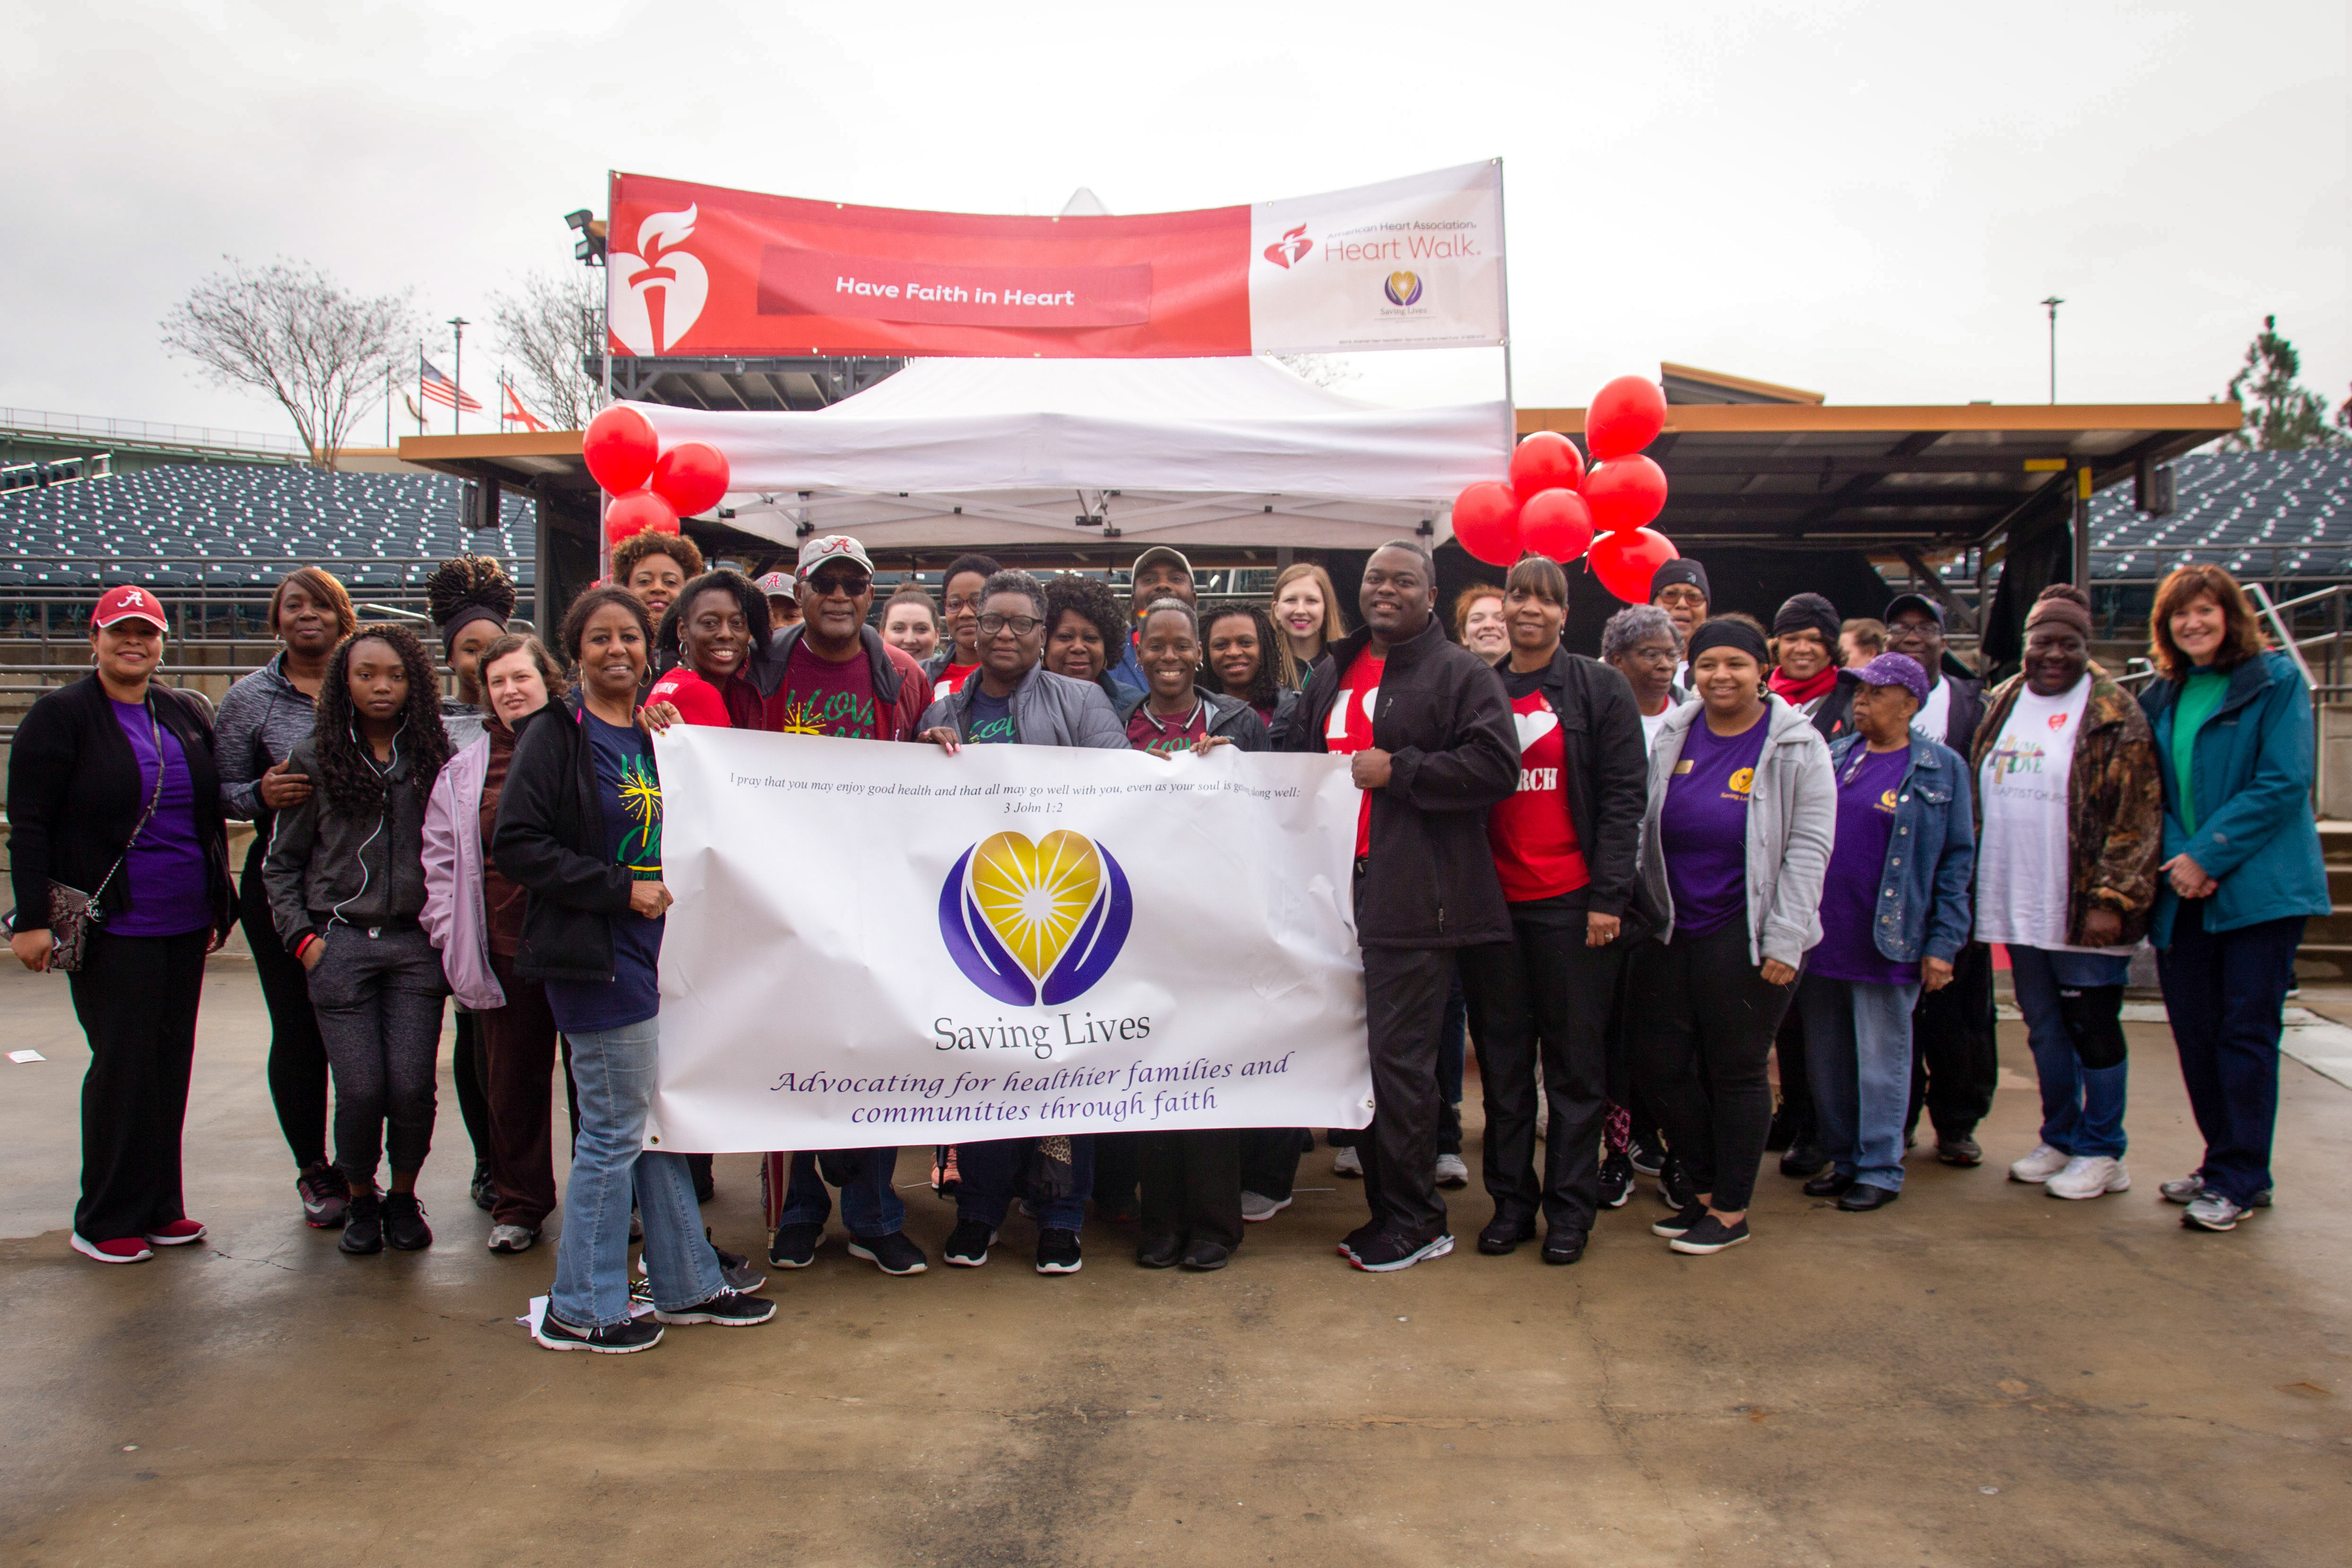 Saving Lives member church participants pose for a group photo at the 2019 Heart Walk.